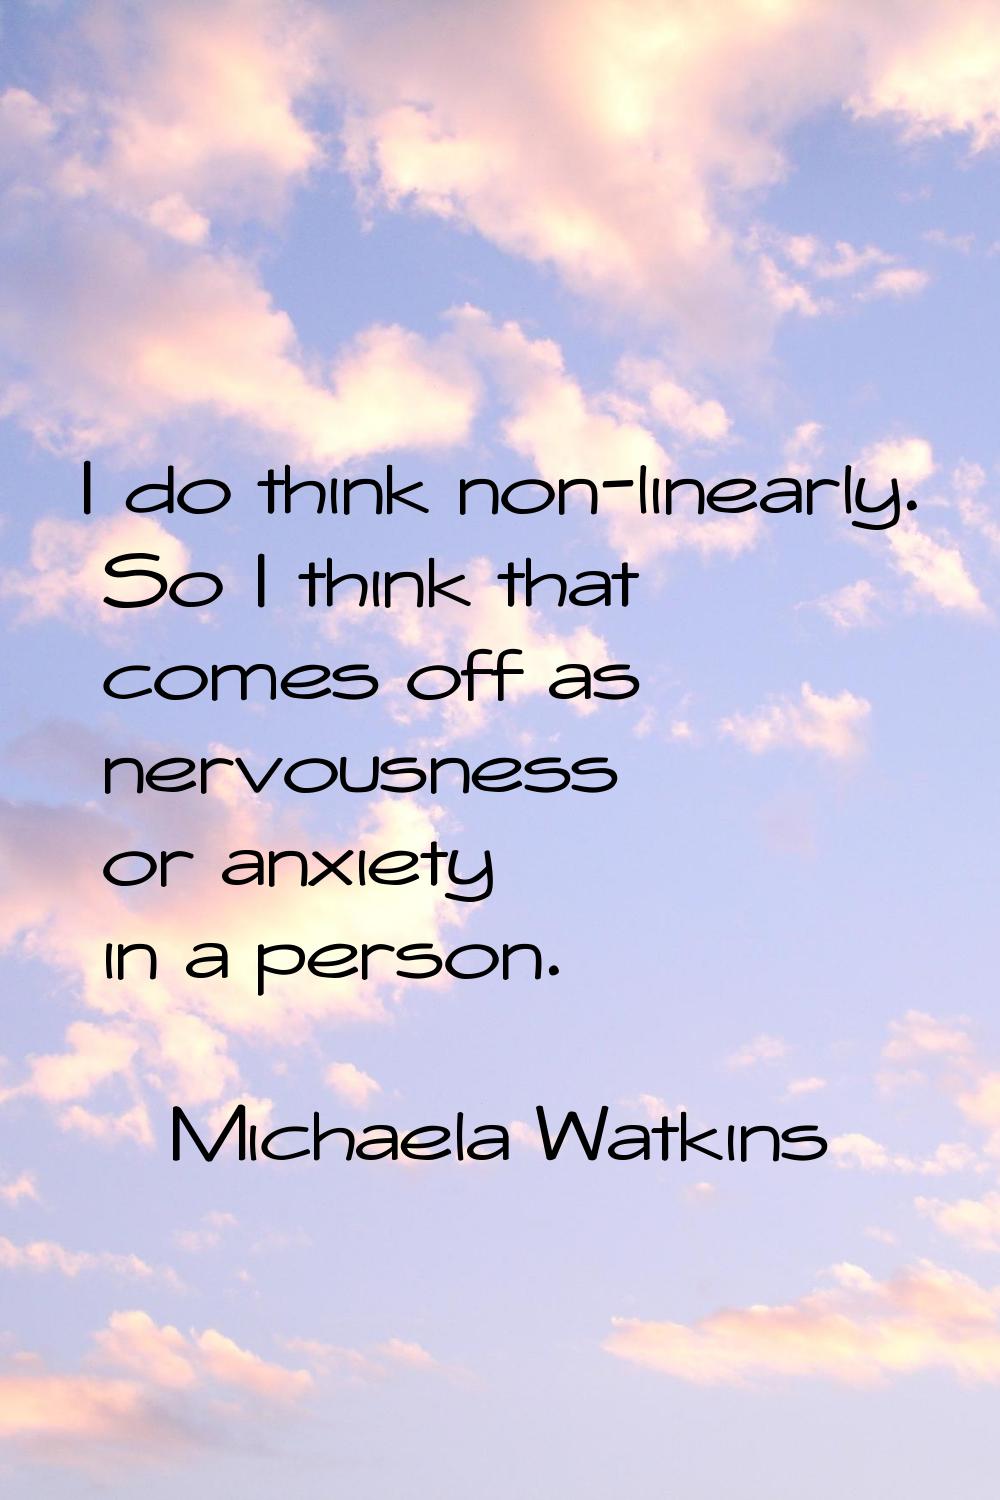 I do think non-linearly. So I think that comes off as nervousness or anxiety in a person.